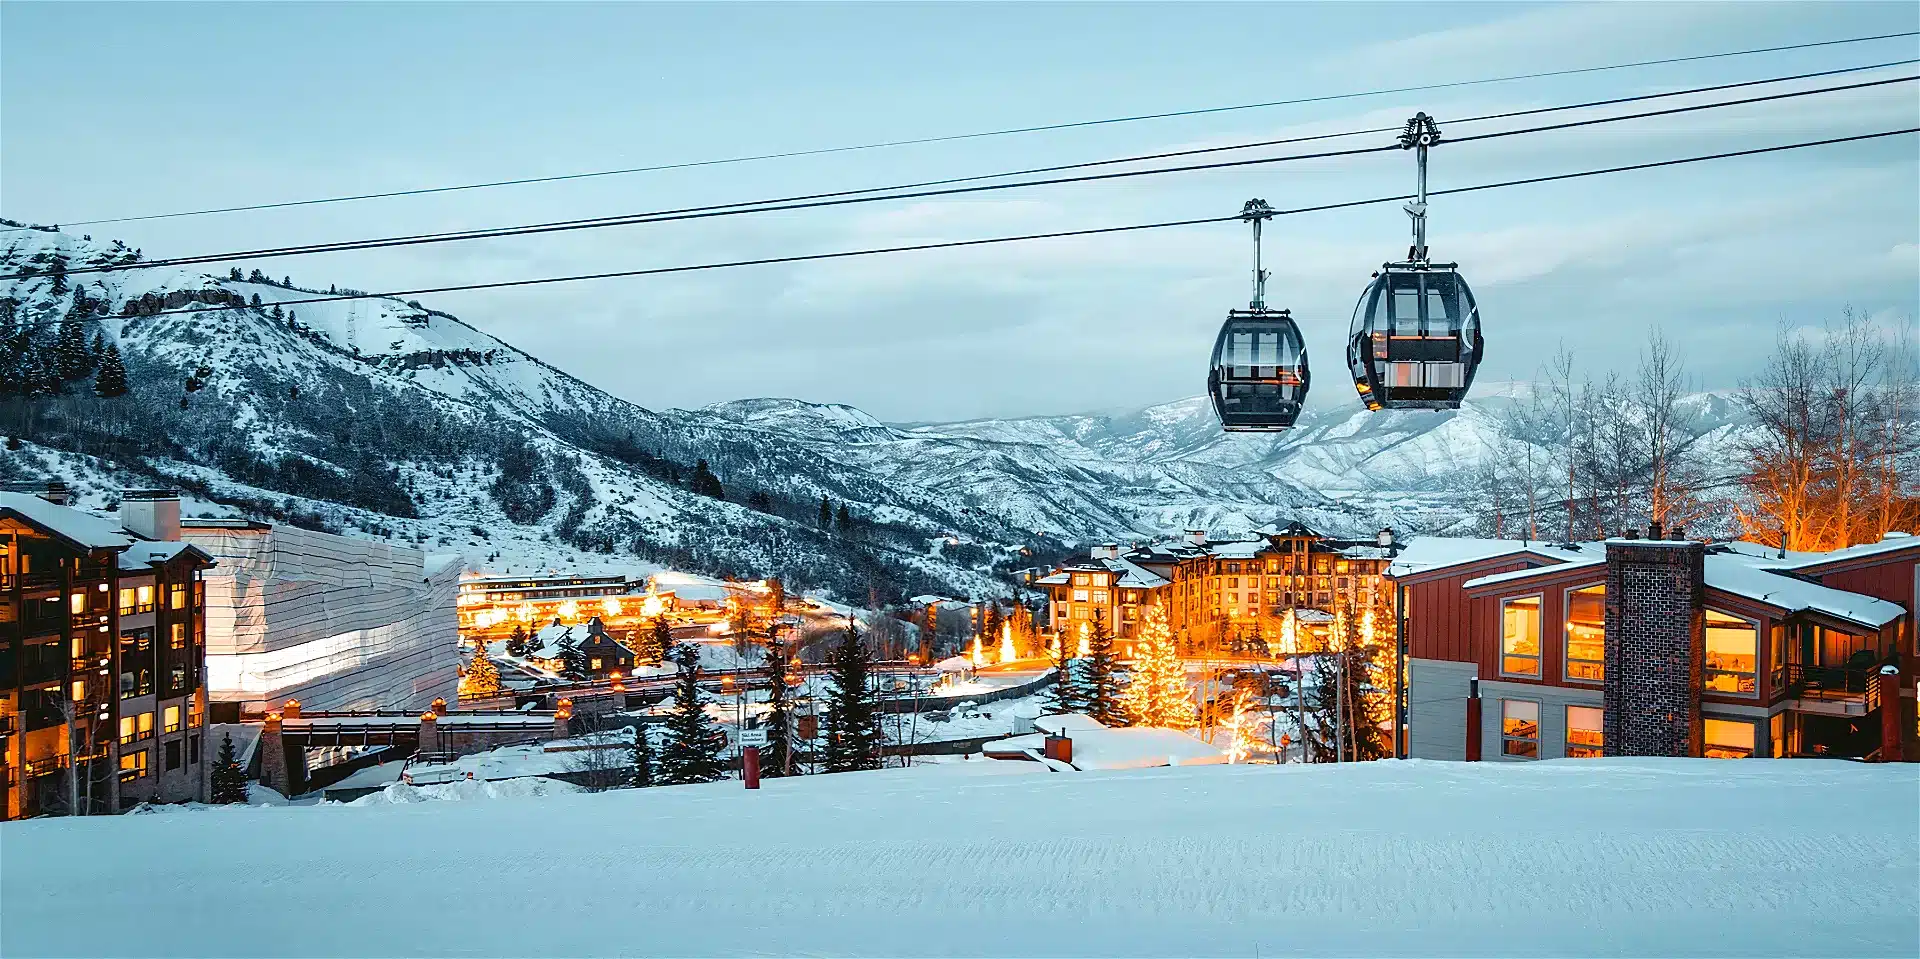 Ski lift in Breckenridge, fundraiser auction items, live auction items